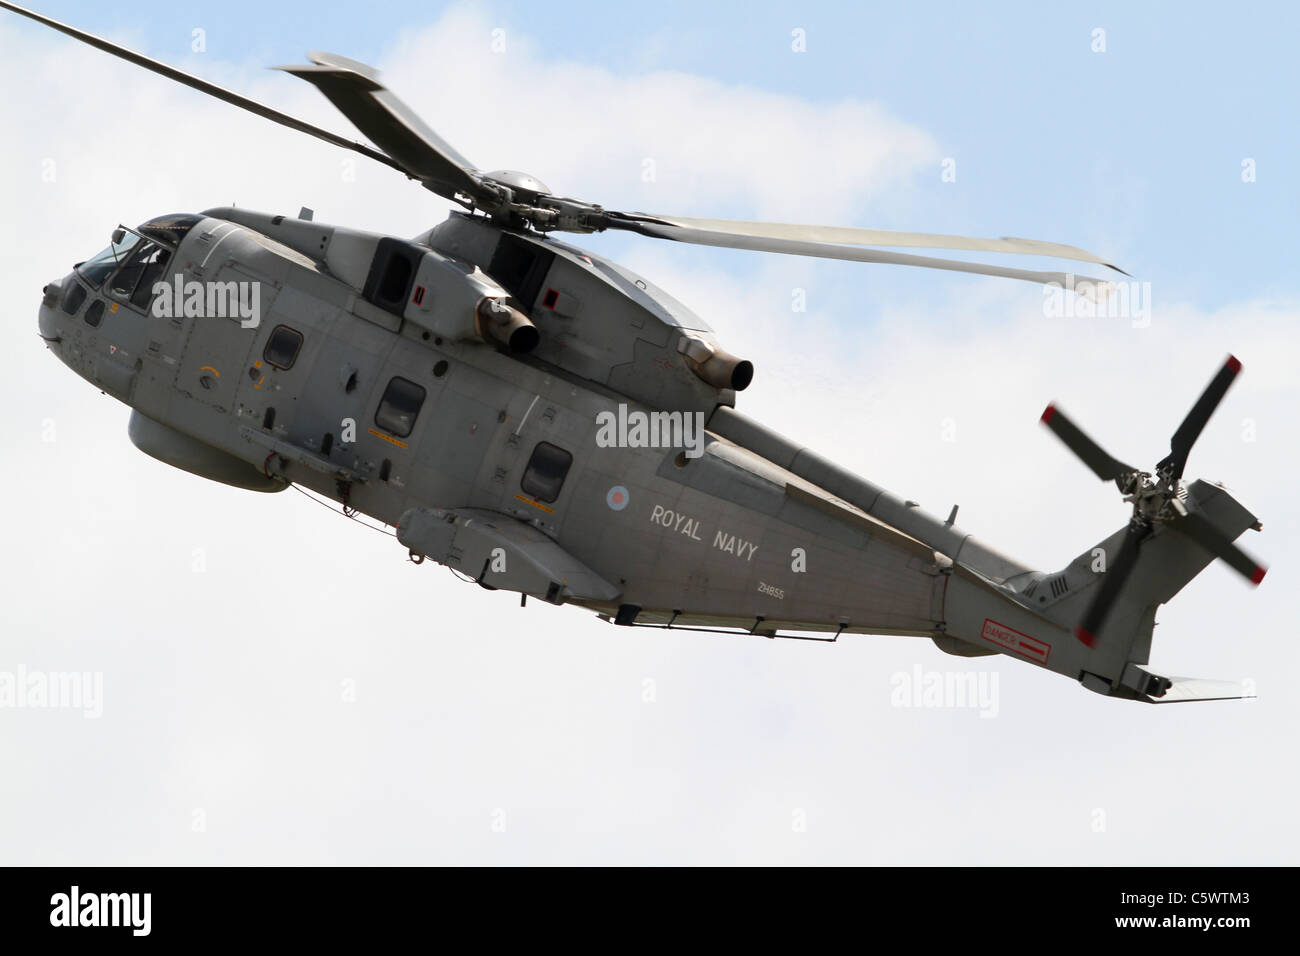 MERLIN HM1 HELICOPTER ROYAL NAVY'S 824 NAS 02 July 2011 Stock Photo